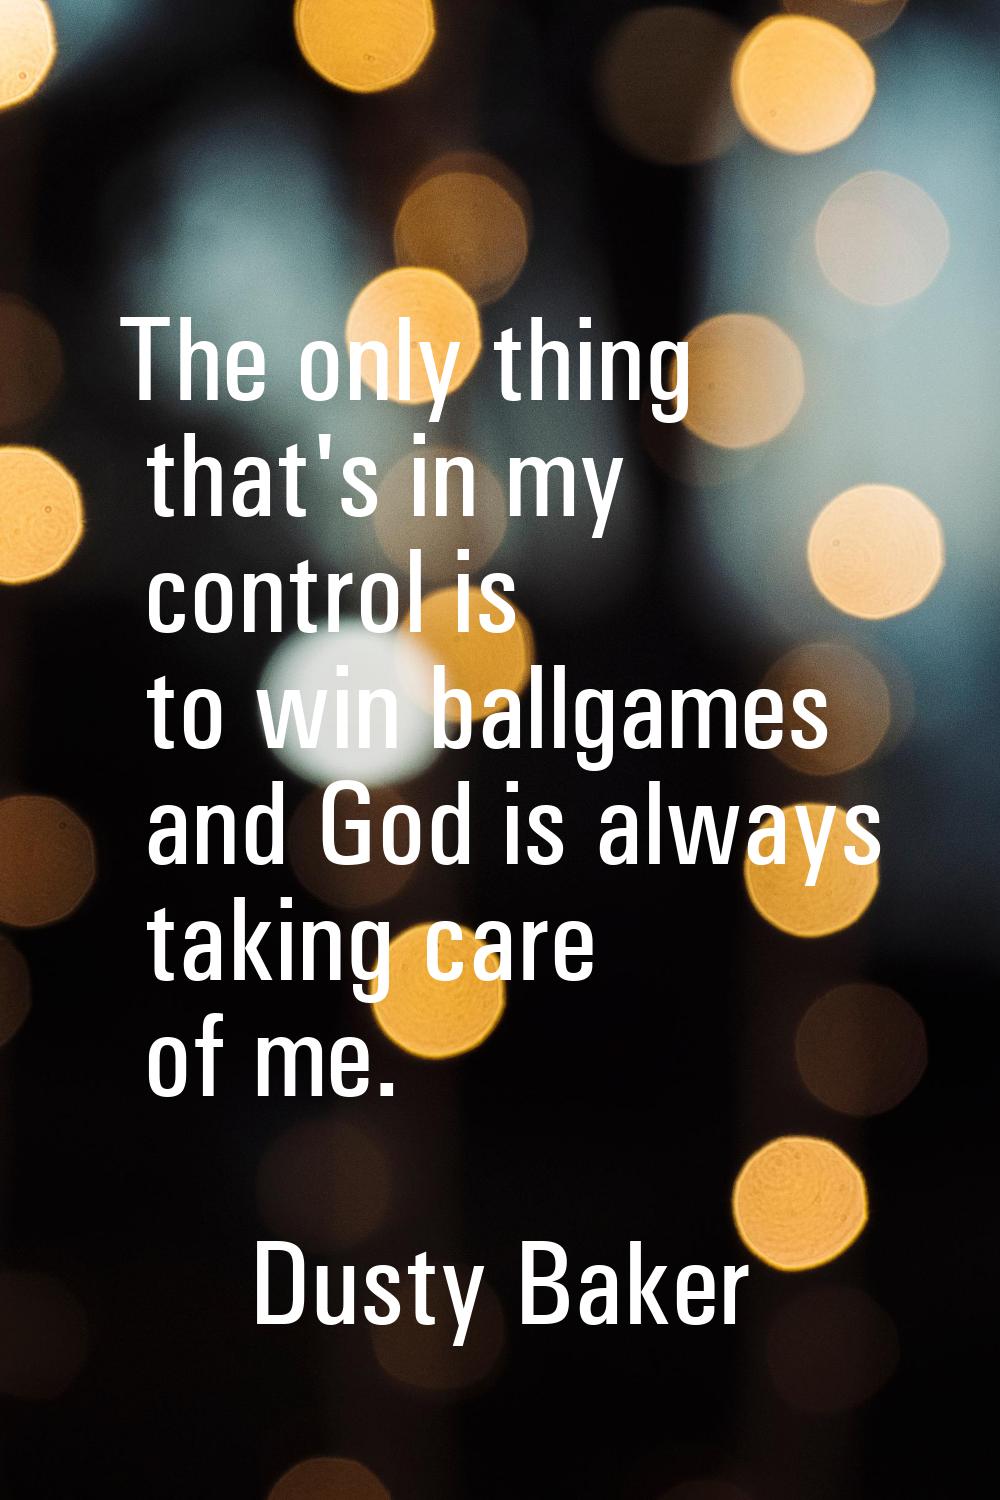 The only thing that's in my control is to win ballgames and God is always taking care of me.